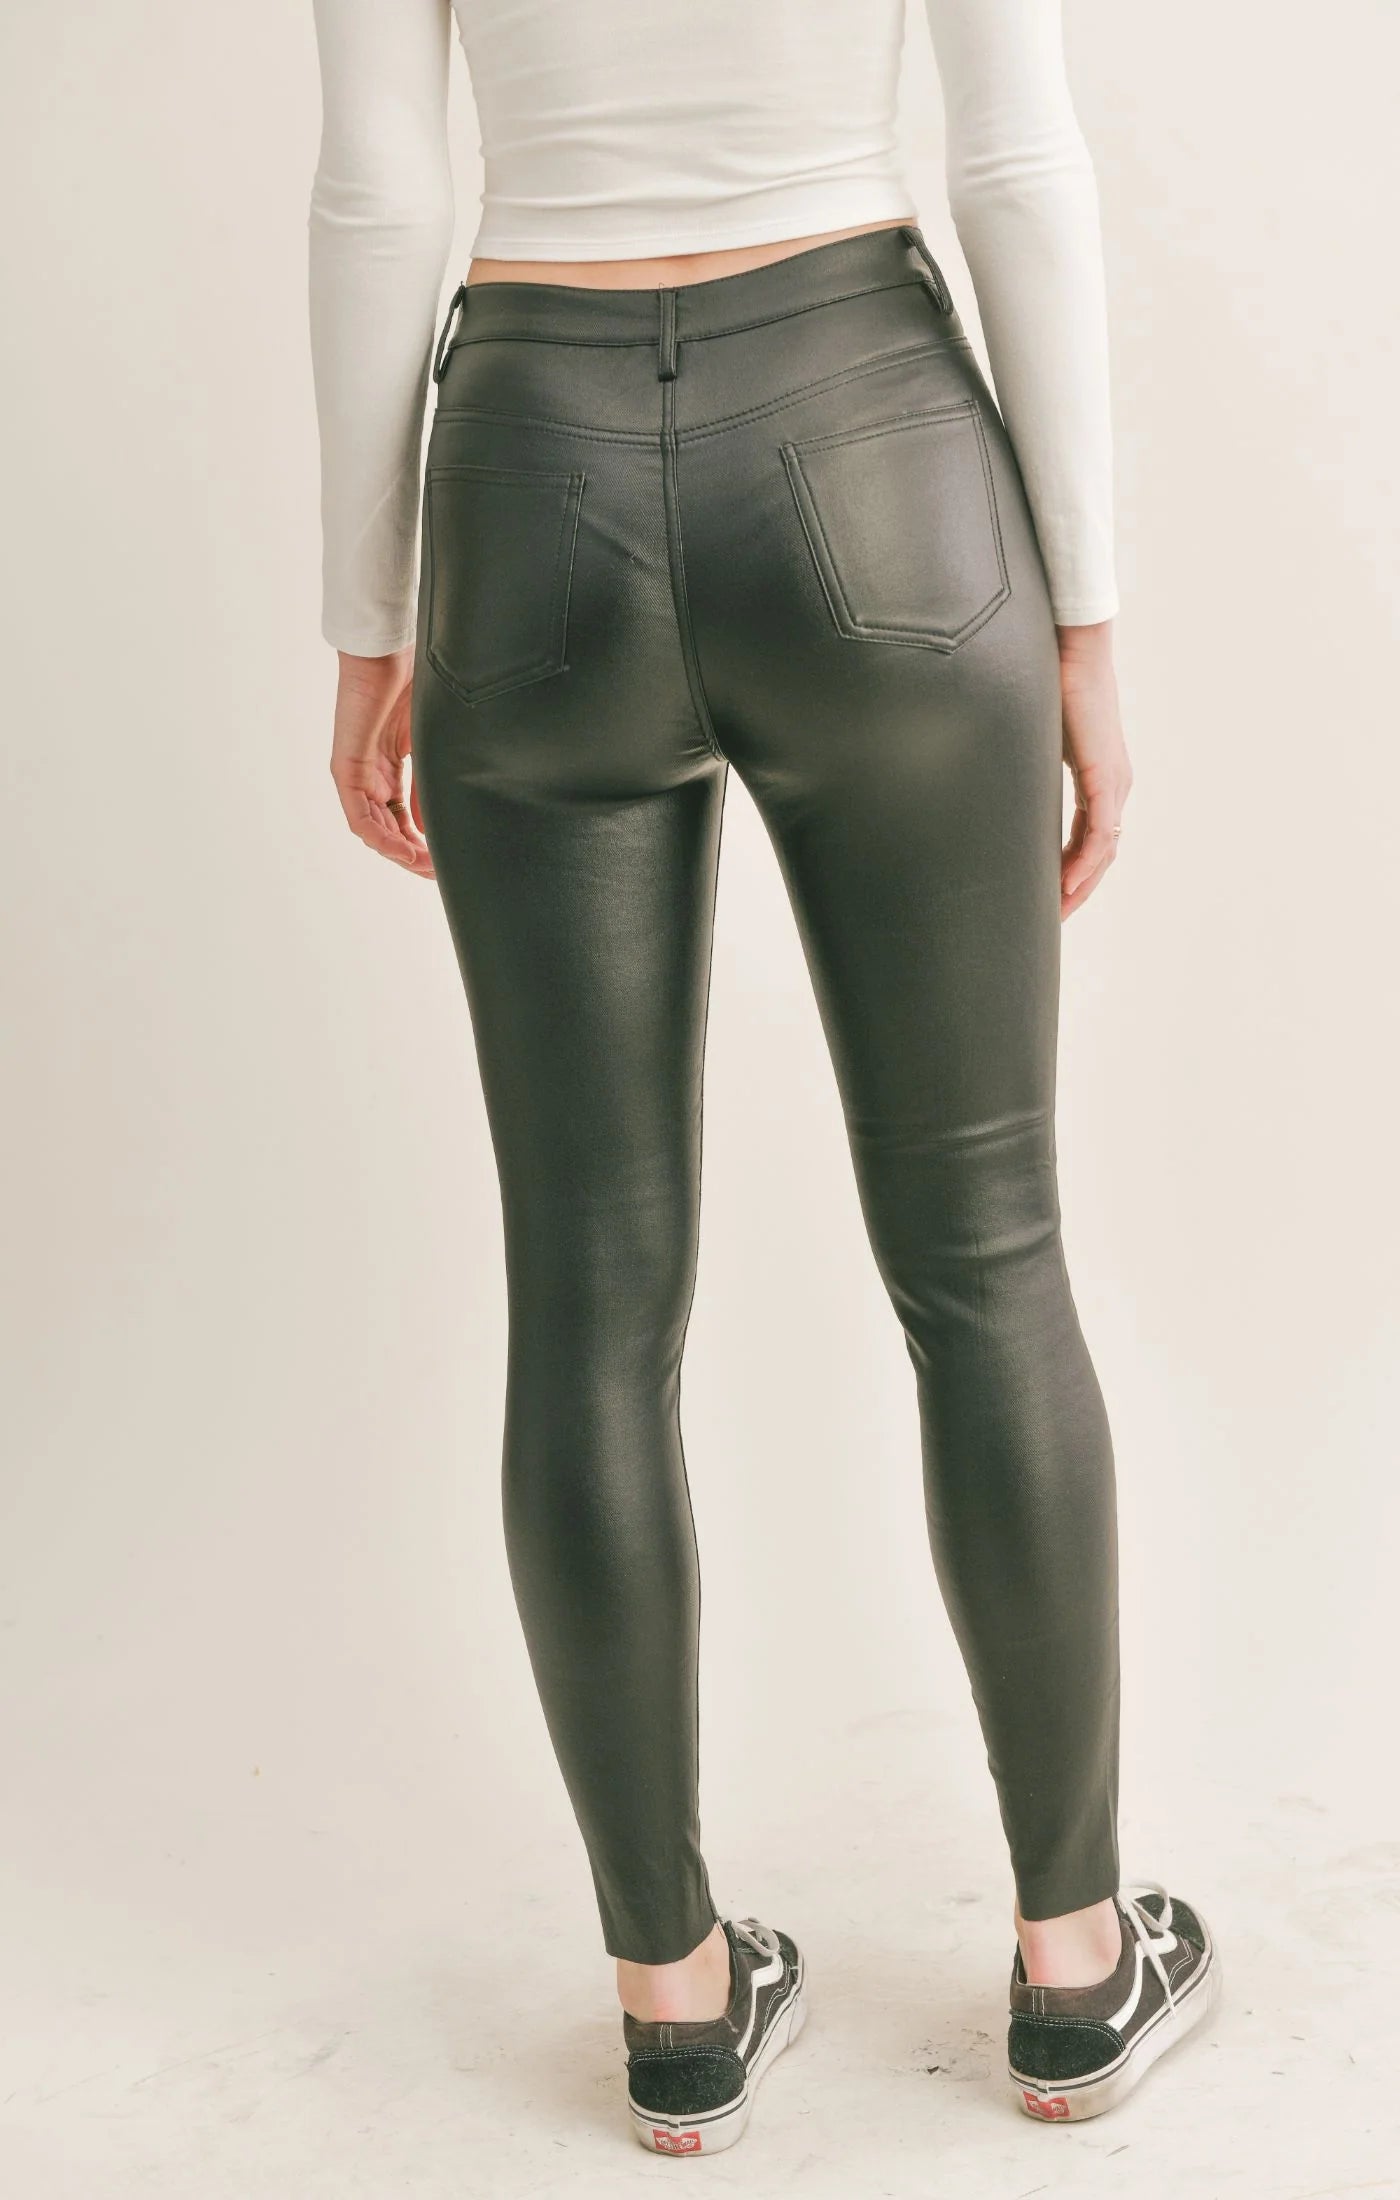 Atta Girl Skinny Faux Leather Pants